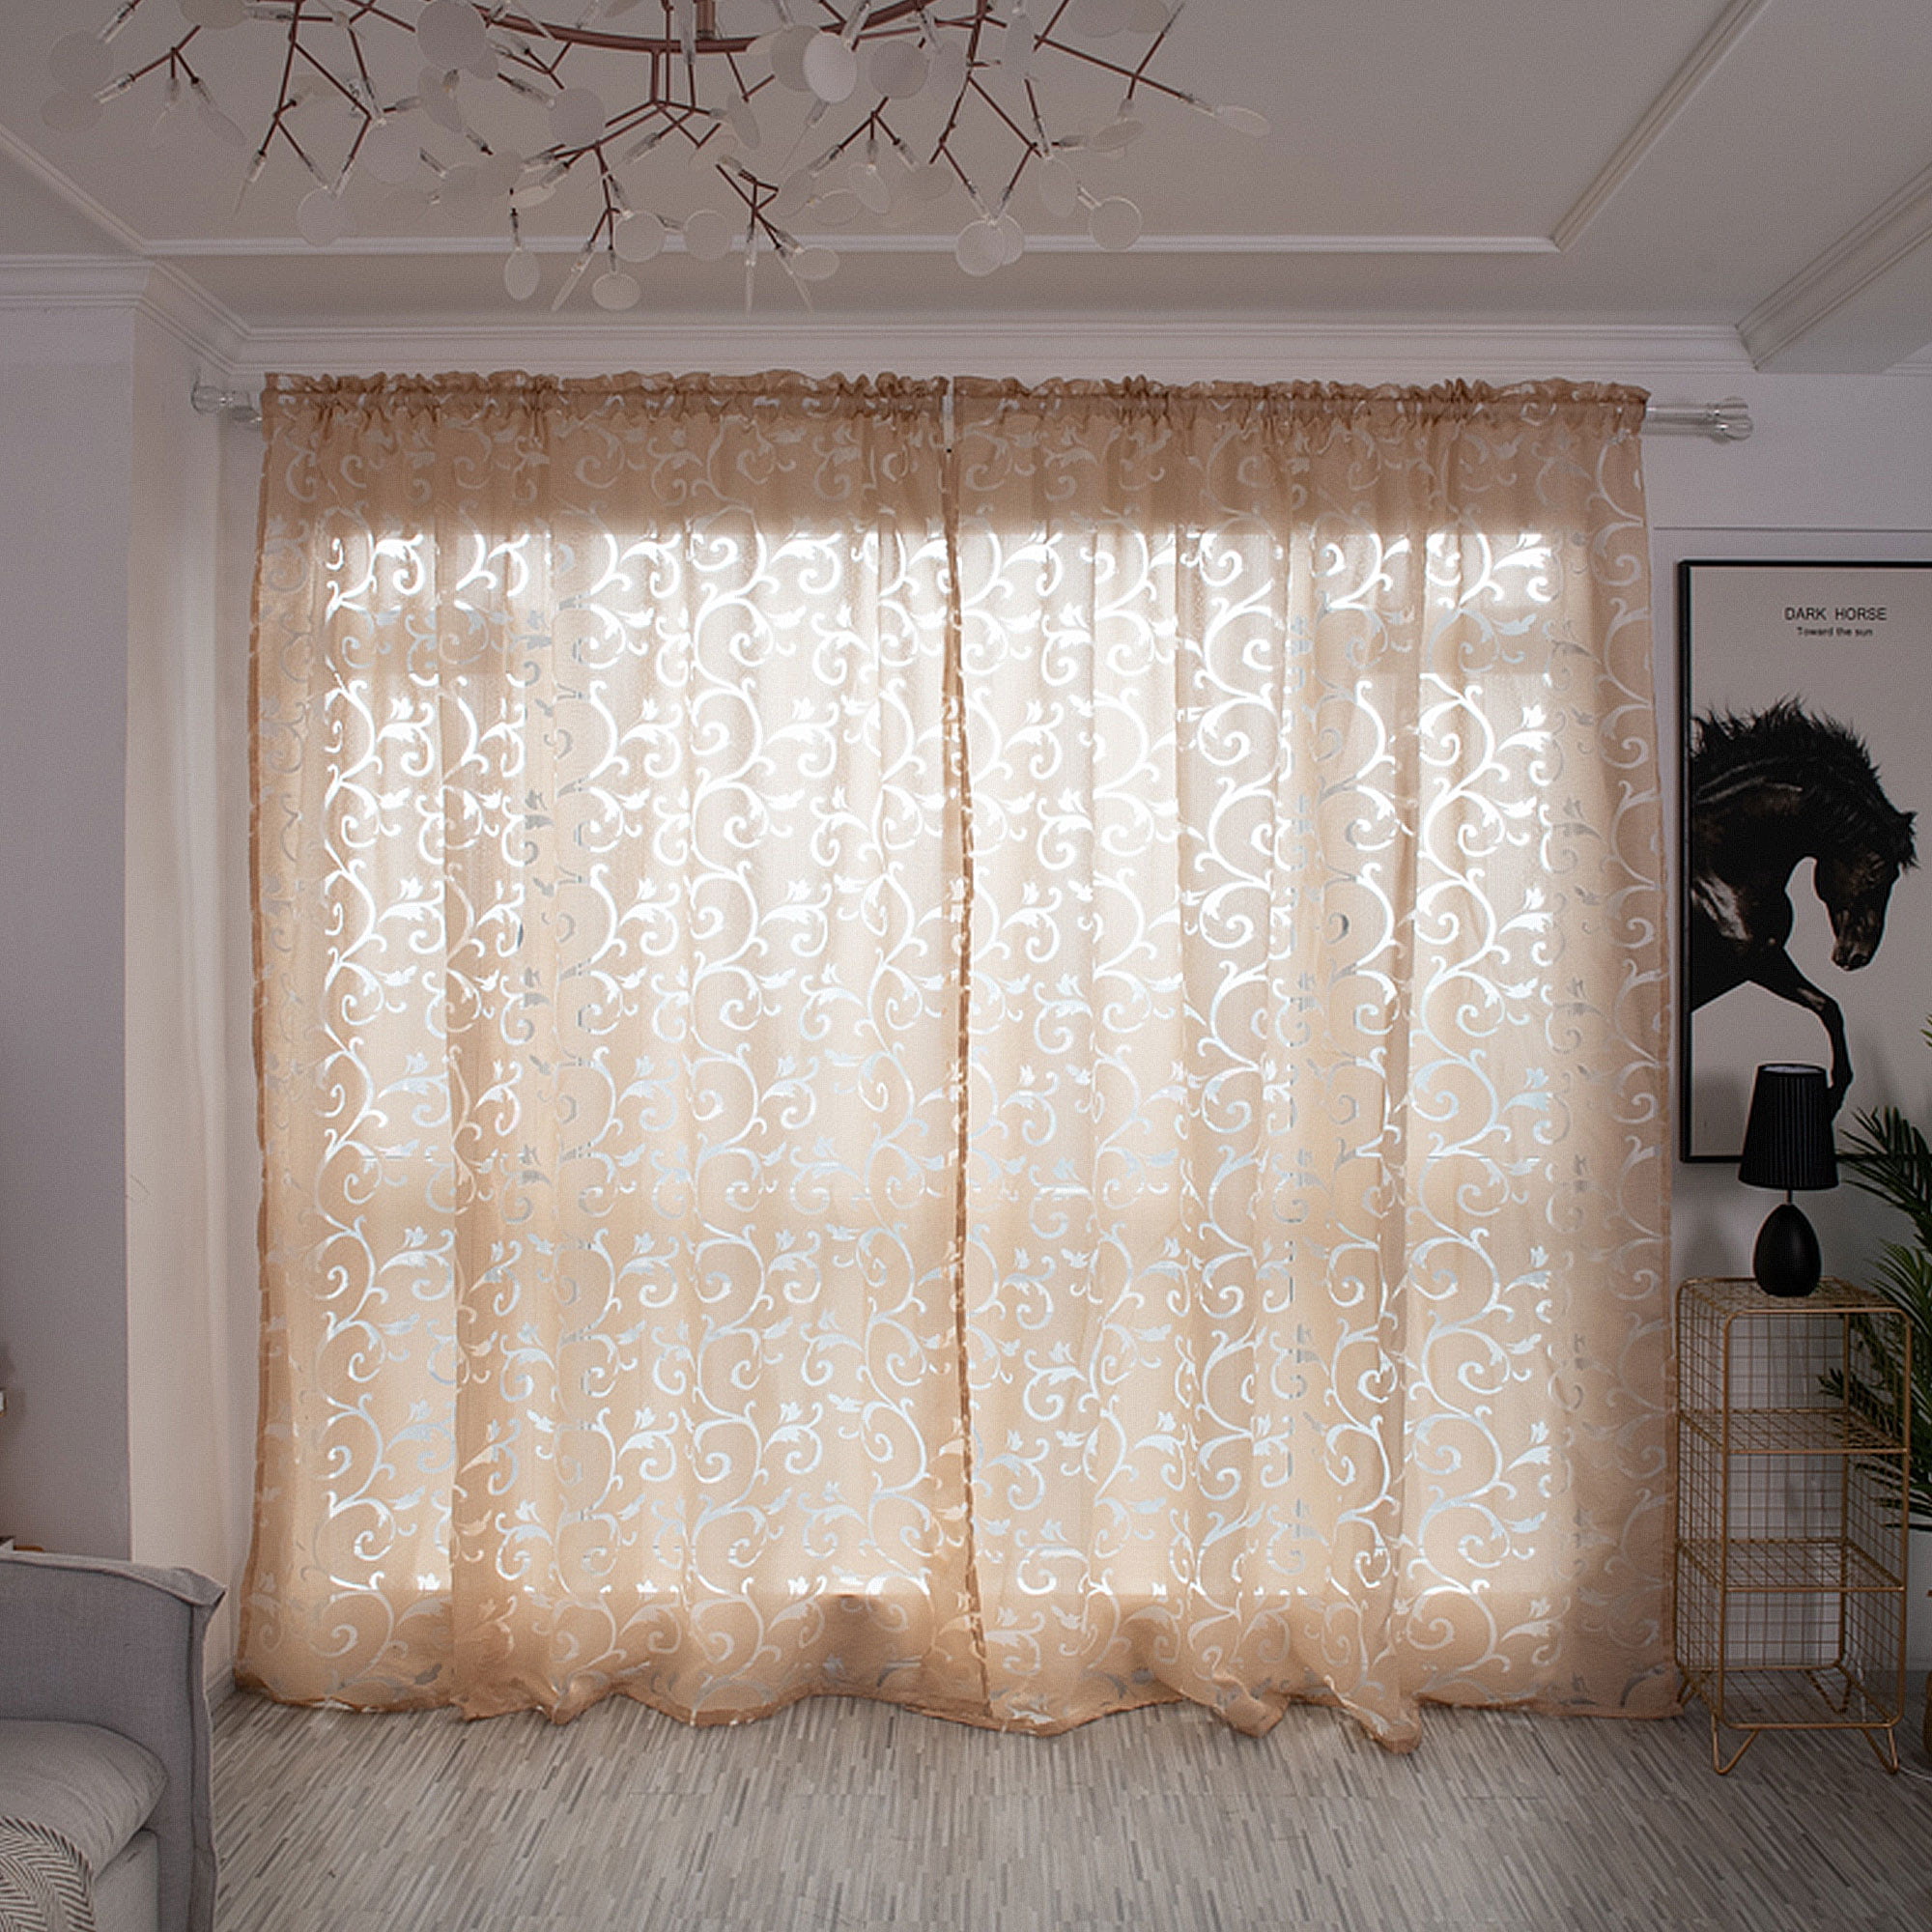 Sheer Voile Window Curtains Drape Panel Scarf Floral Tulle Valance Home Decor 